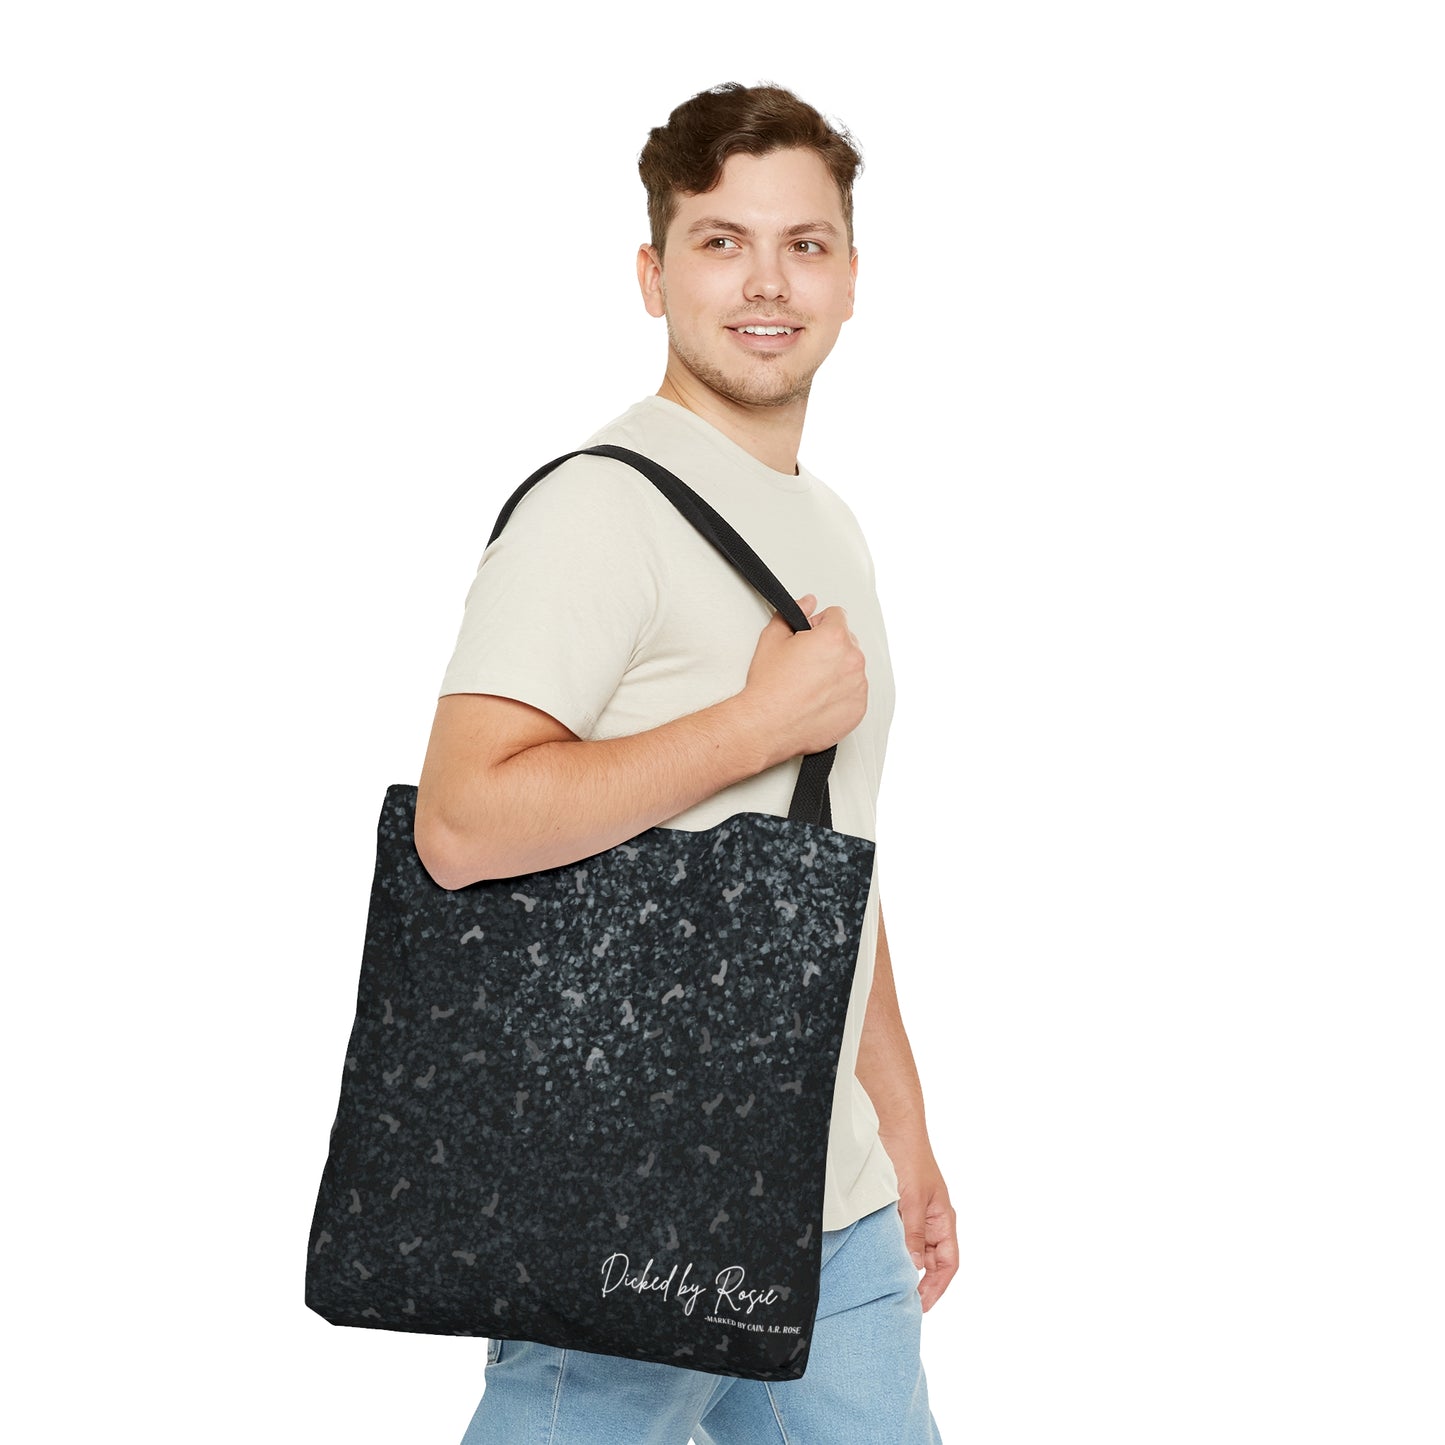 Marked by Cain Tote Bag